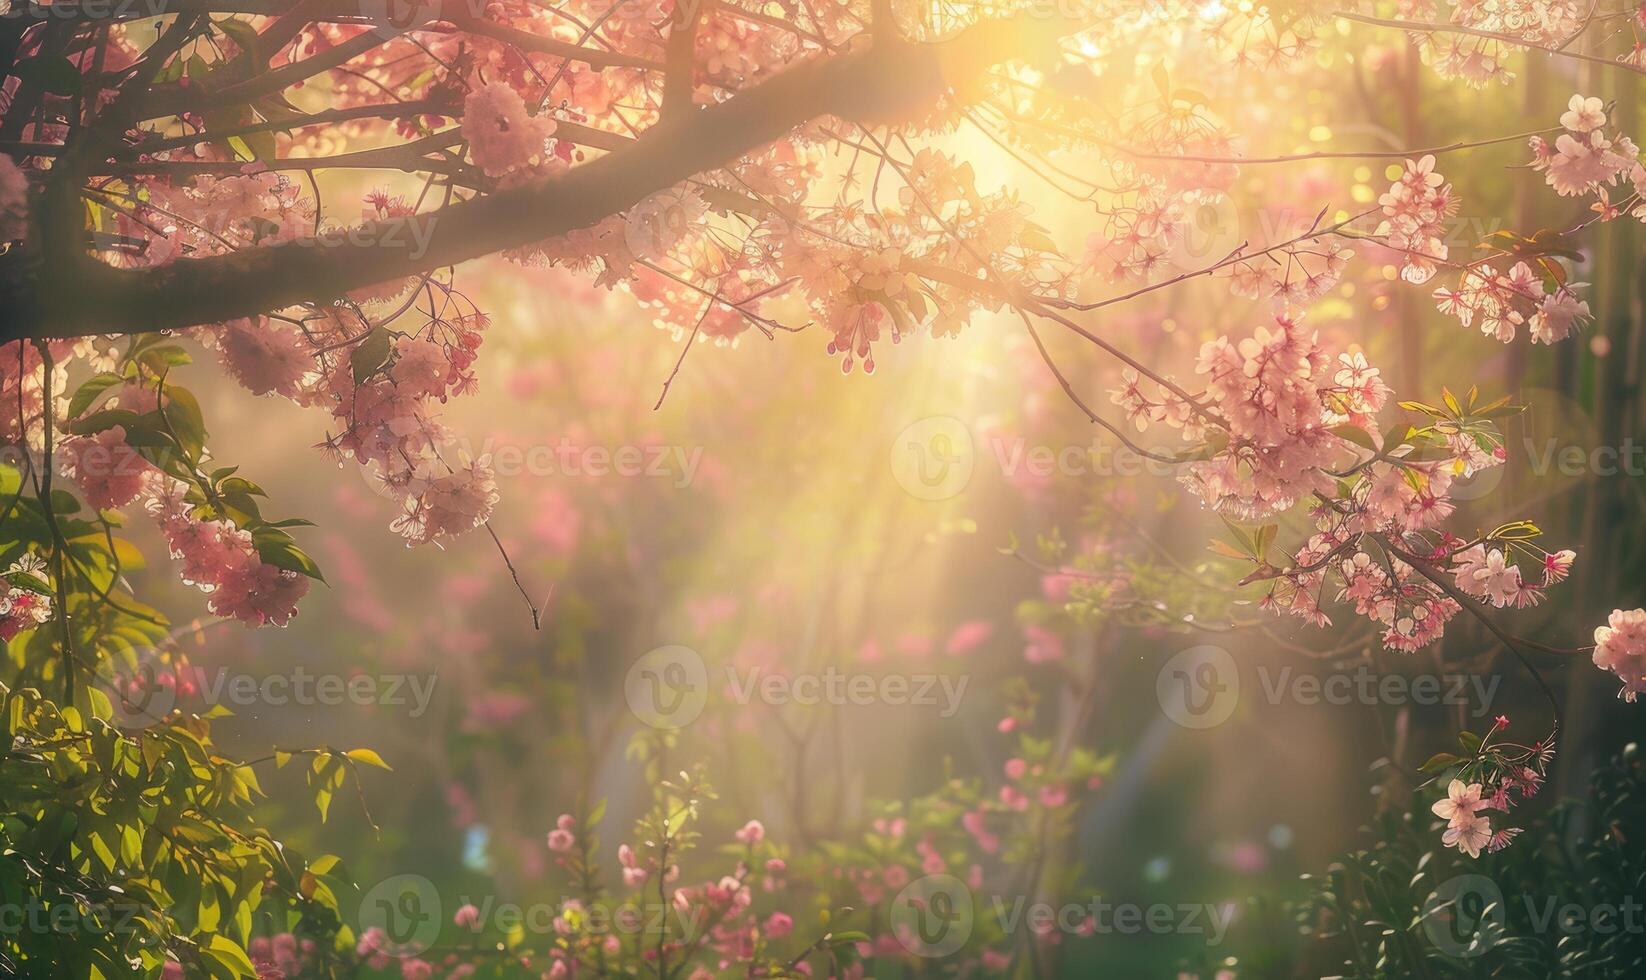 Sunlight filtering through a canopy of blossoming cherry trees in a peaceful garden photo